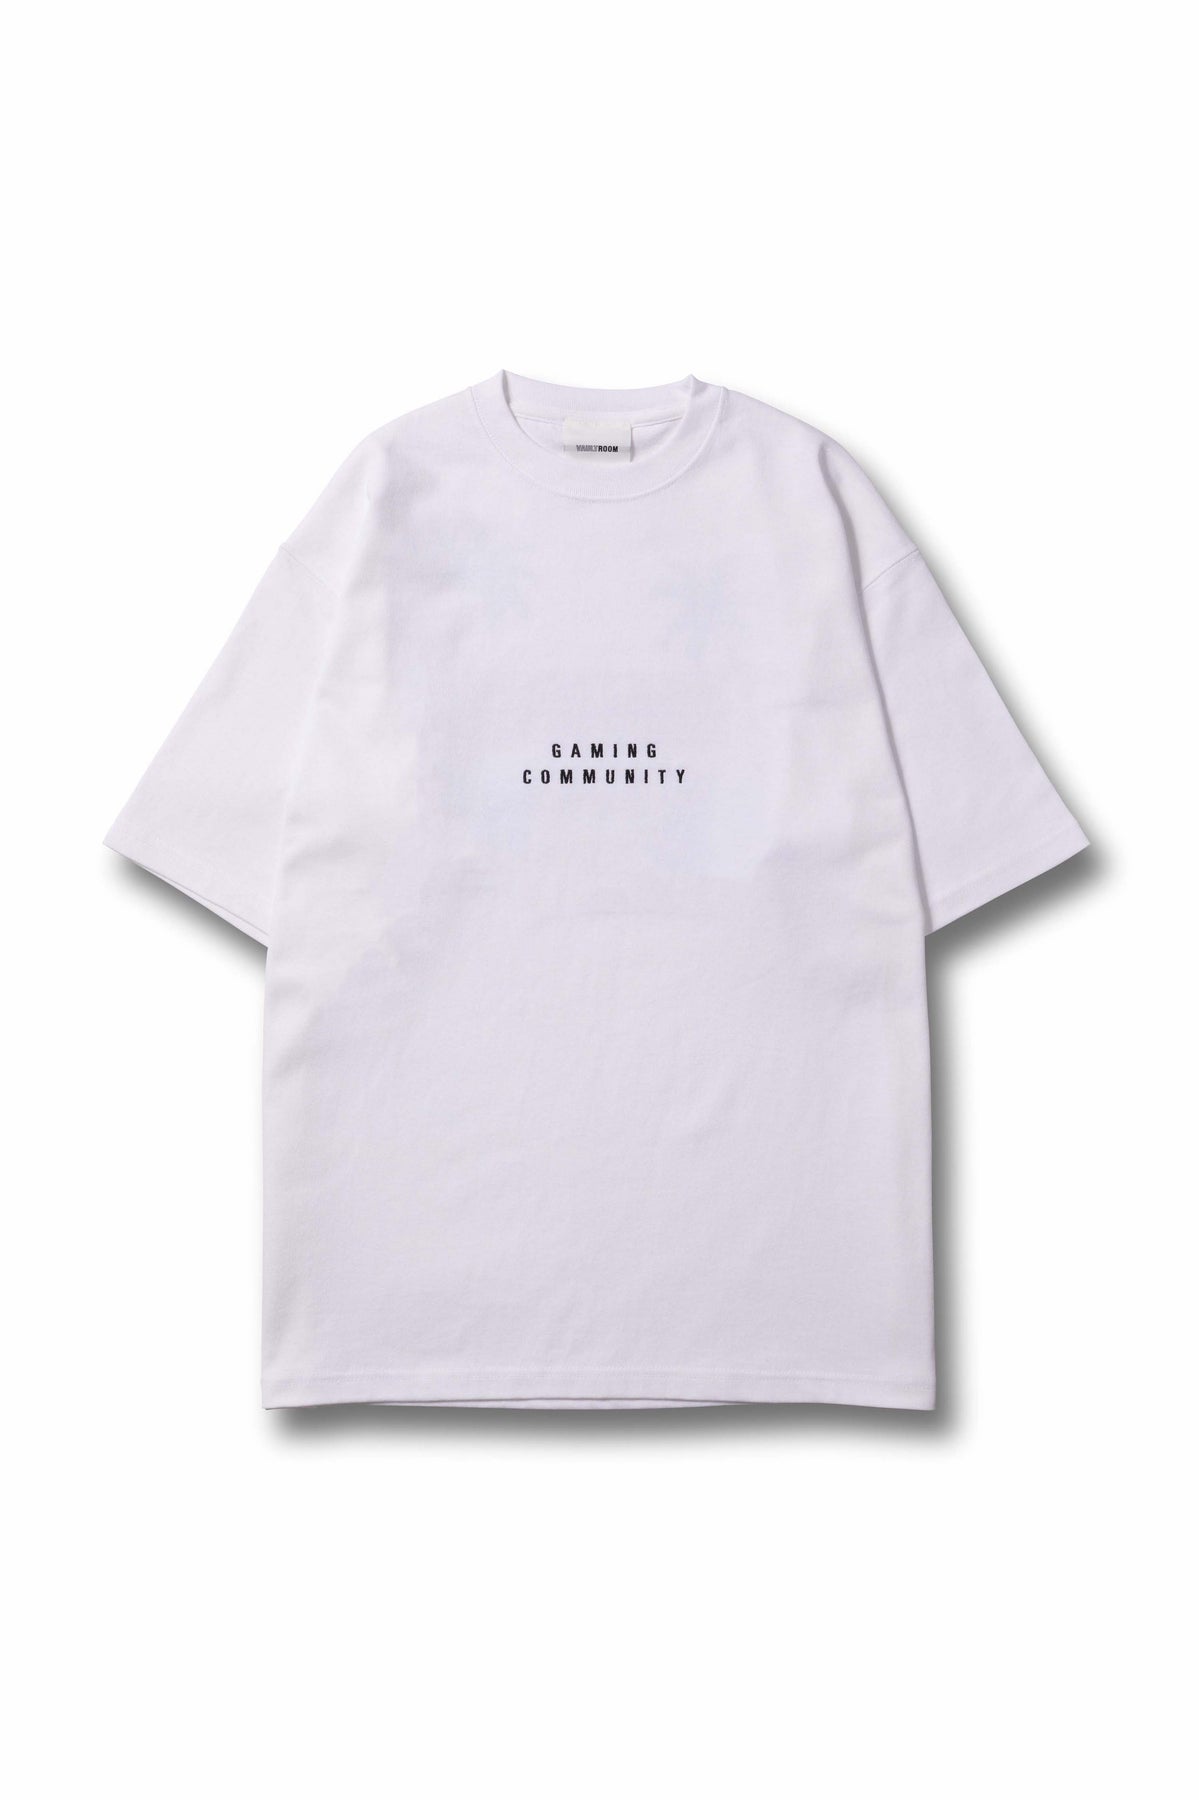 vaultroom GAMING HEAVEN TEE / OFF WHITE | kensysgas.com